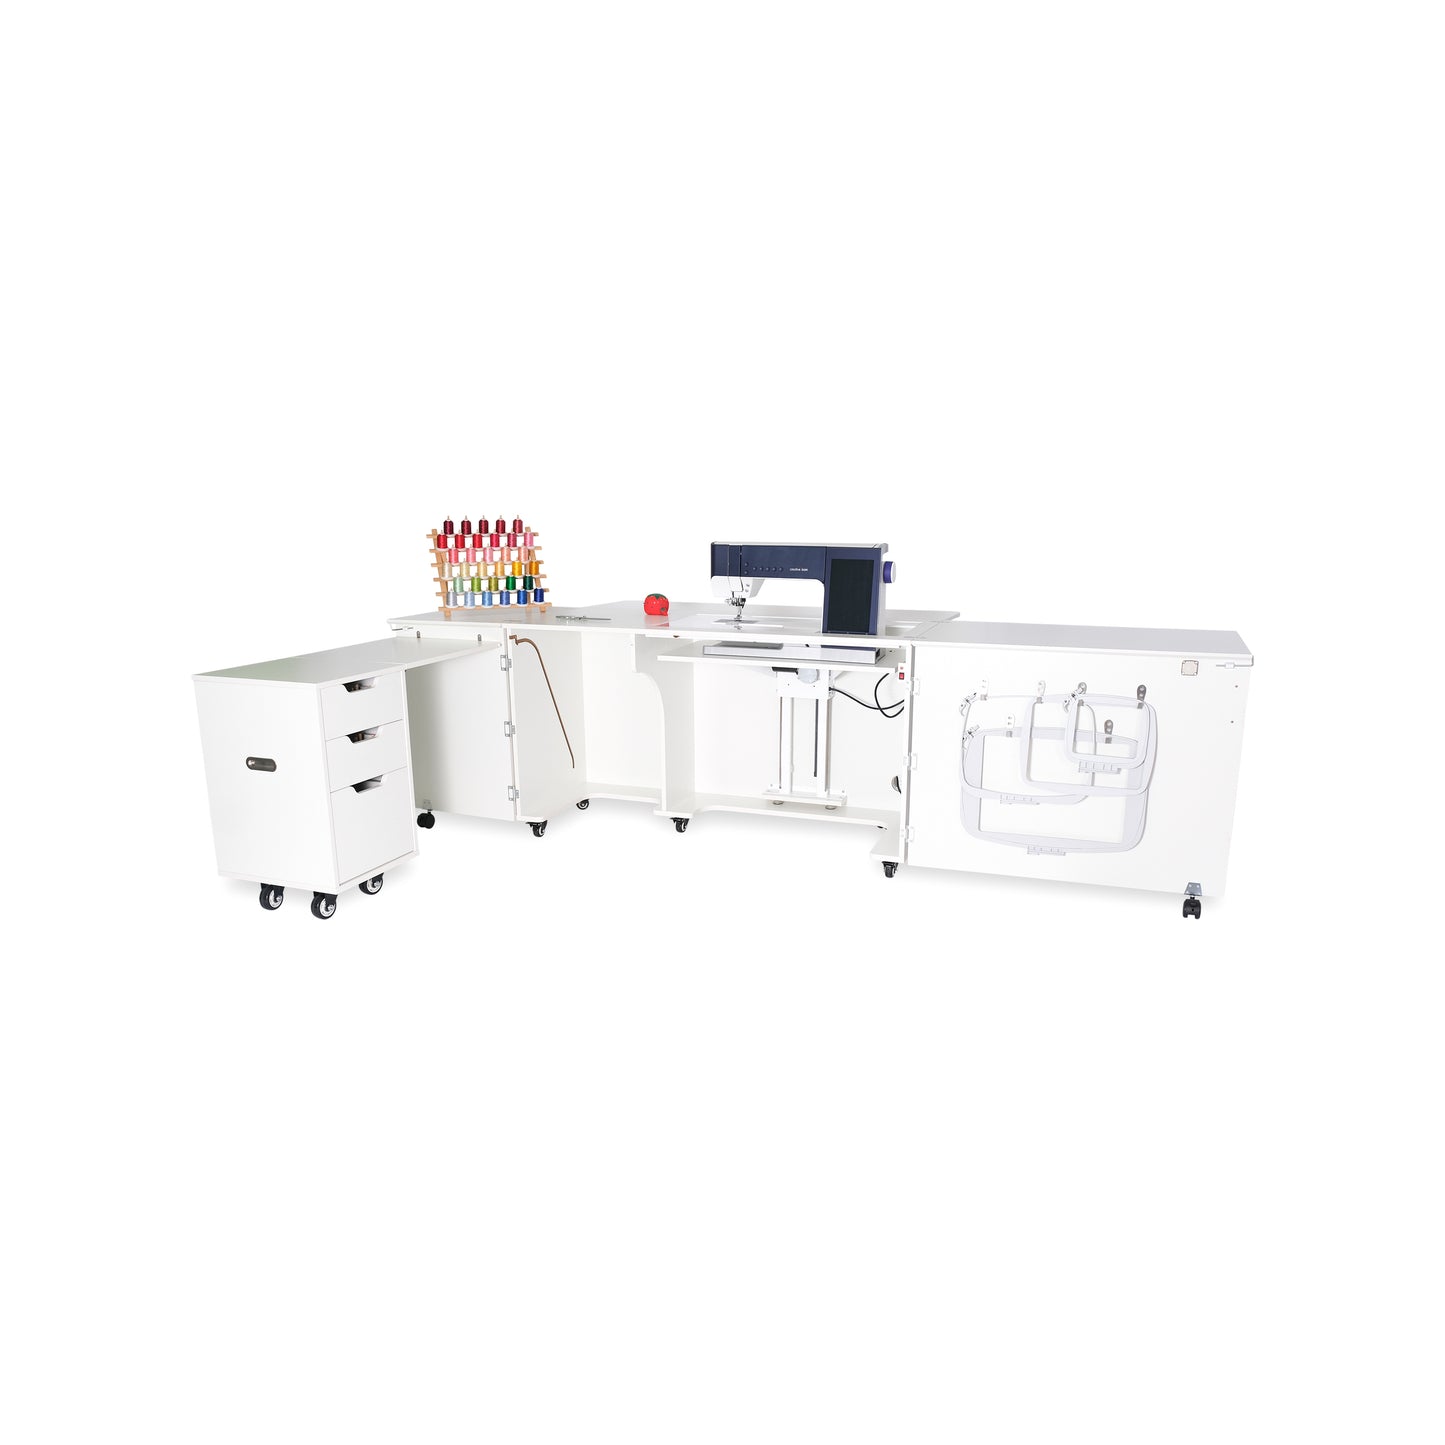 Outback Electric Sewing Cabinet